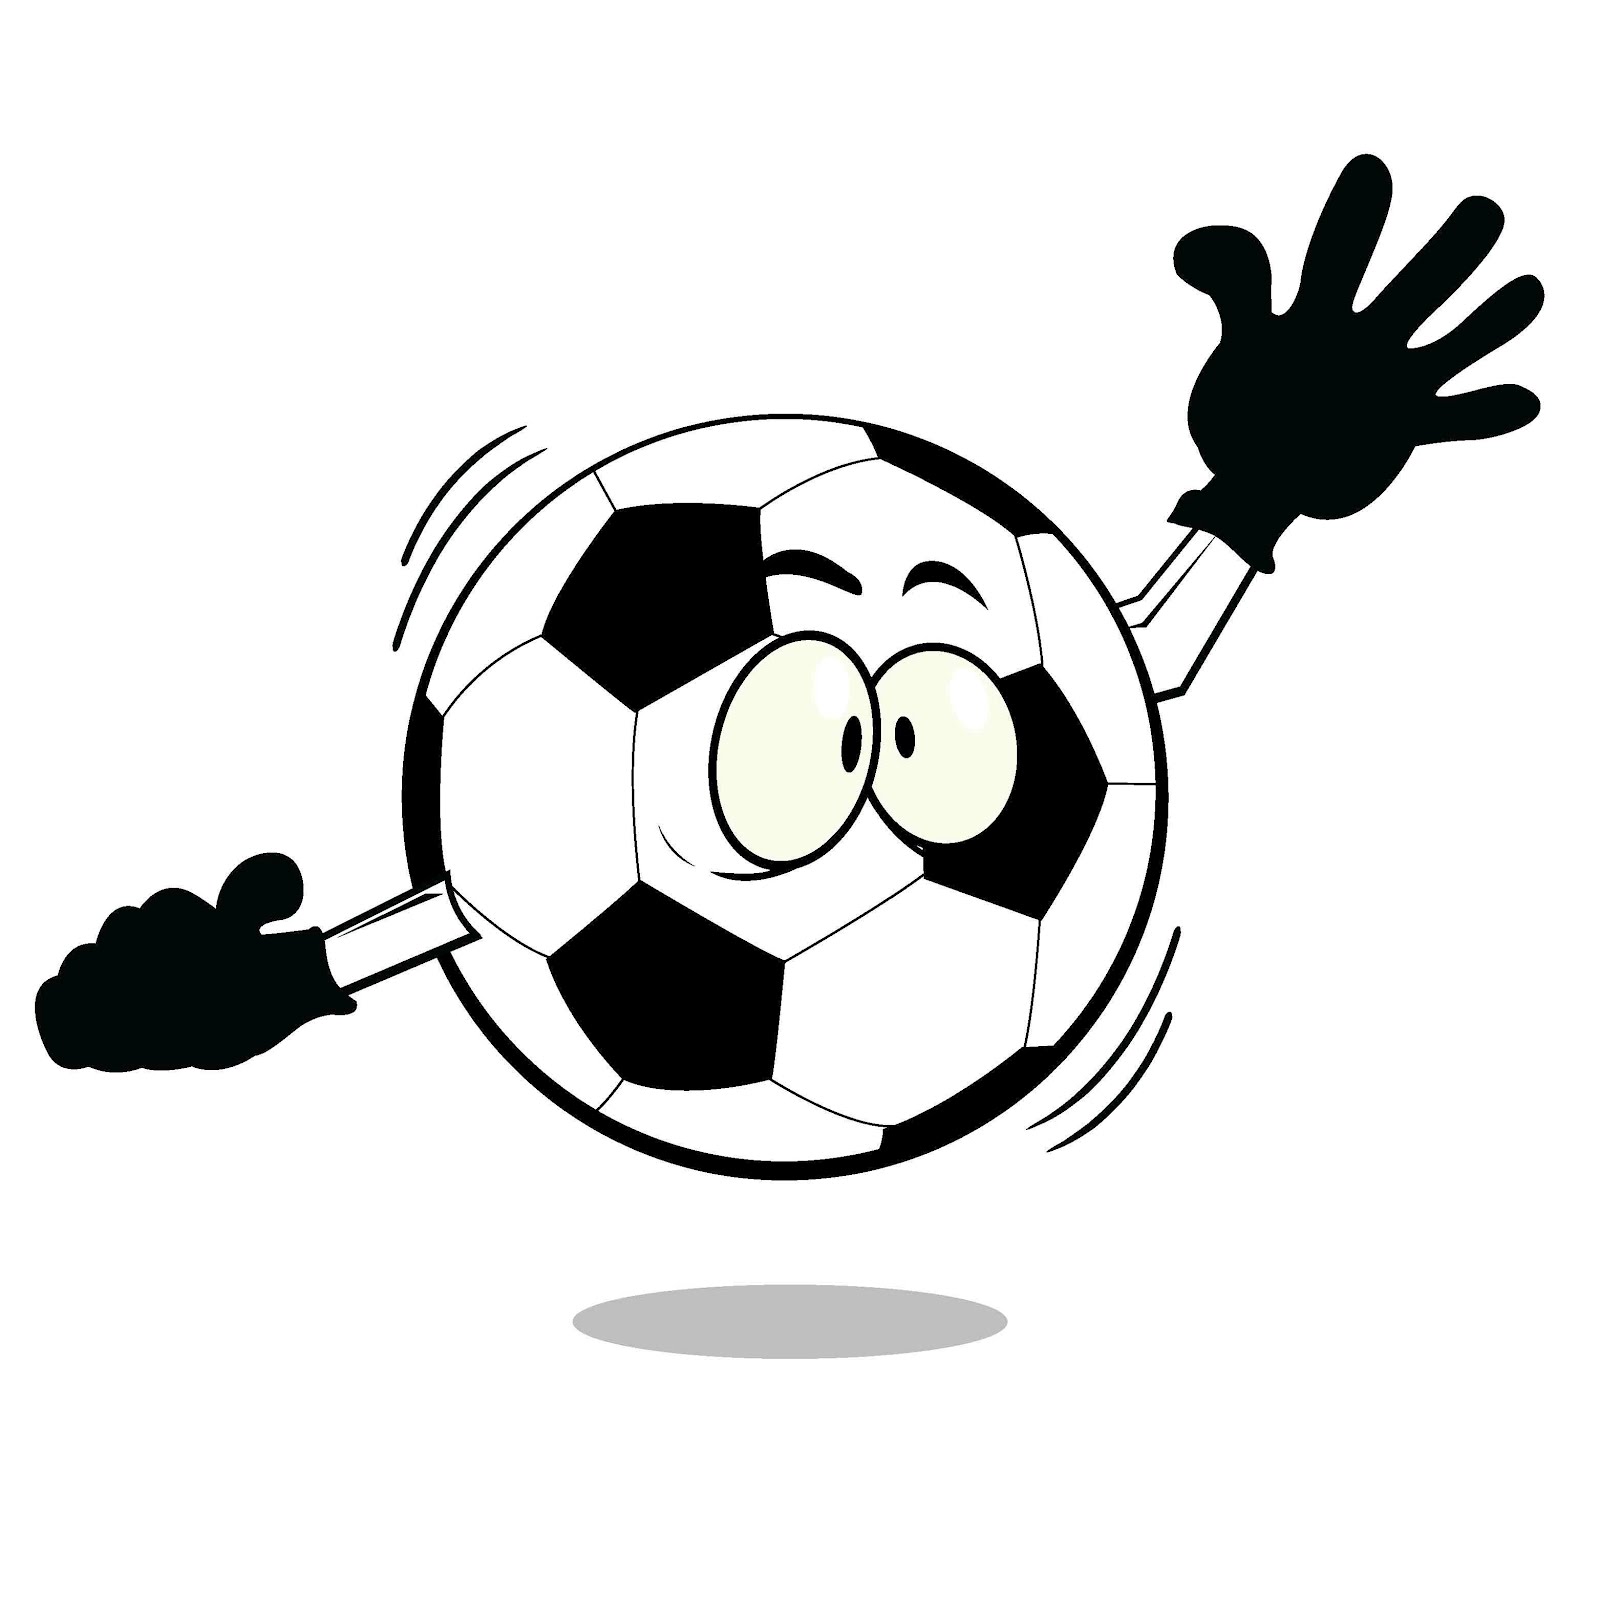 Soccer Cartoon Pictures - HD Wallpapers Lovely